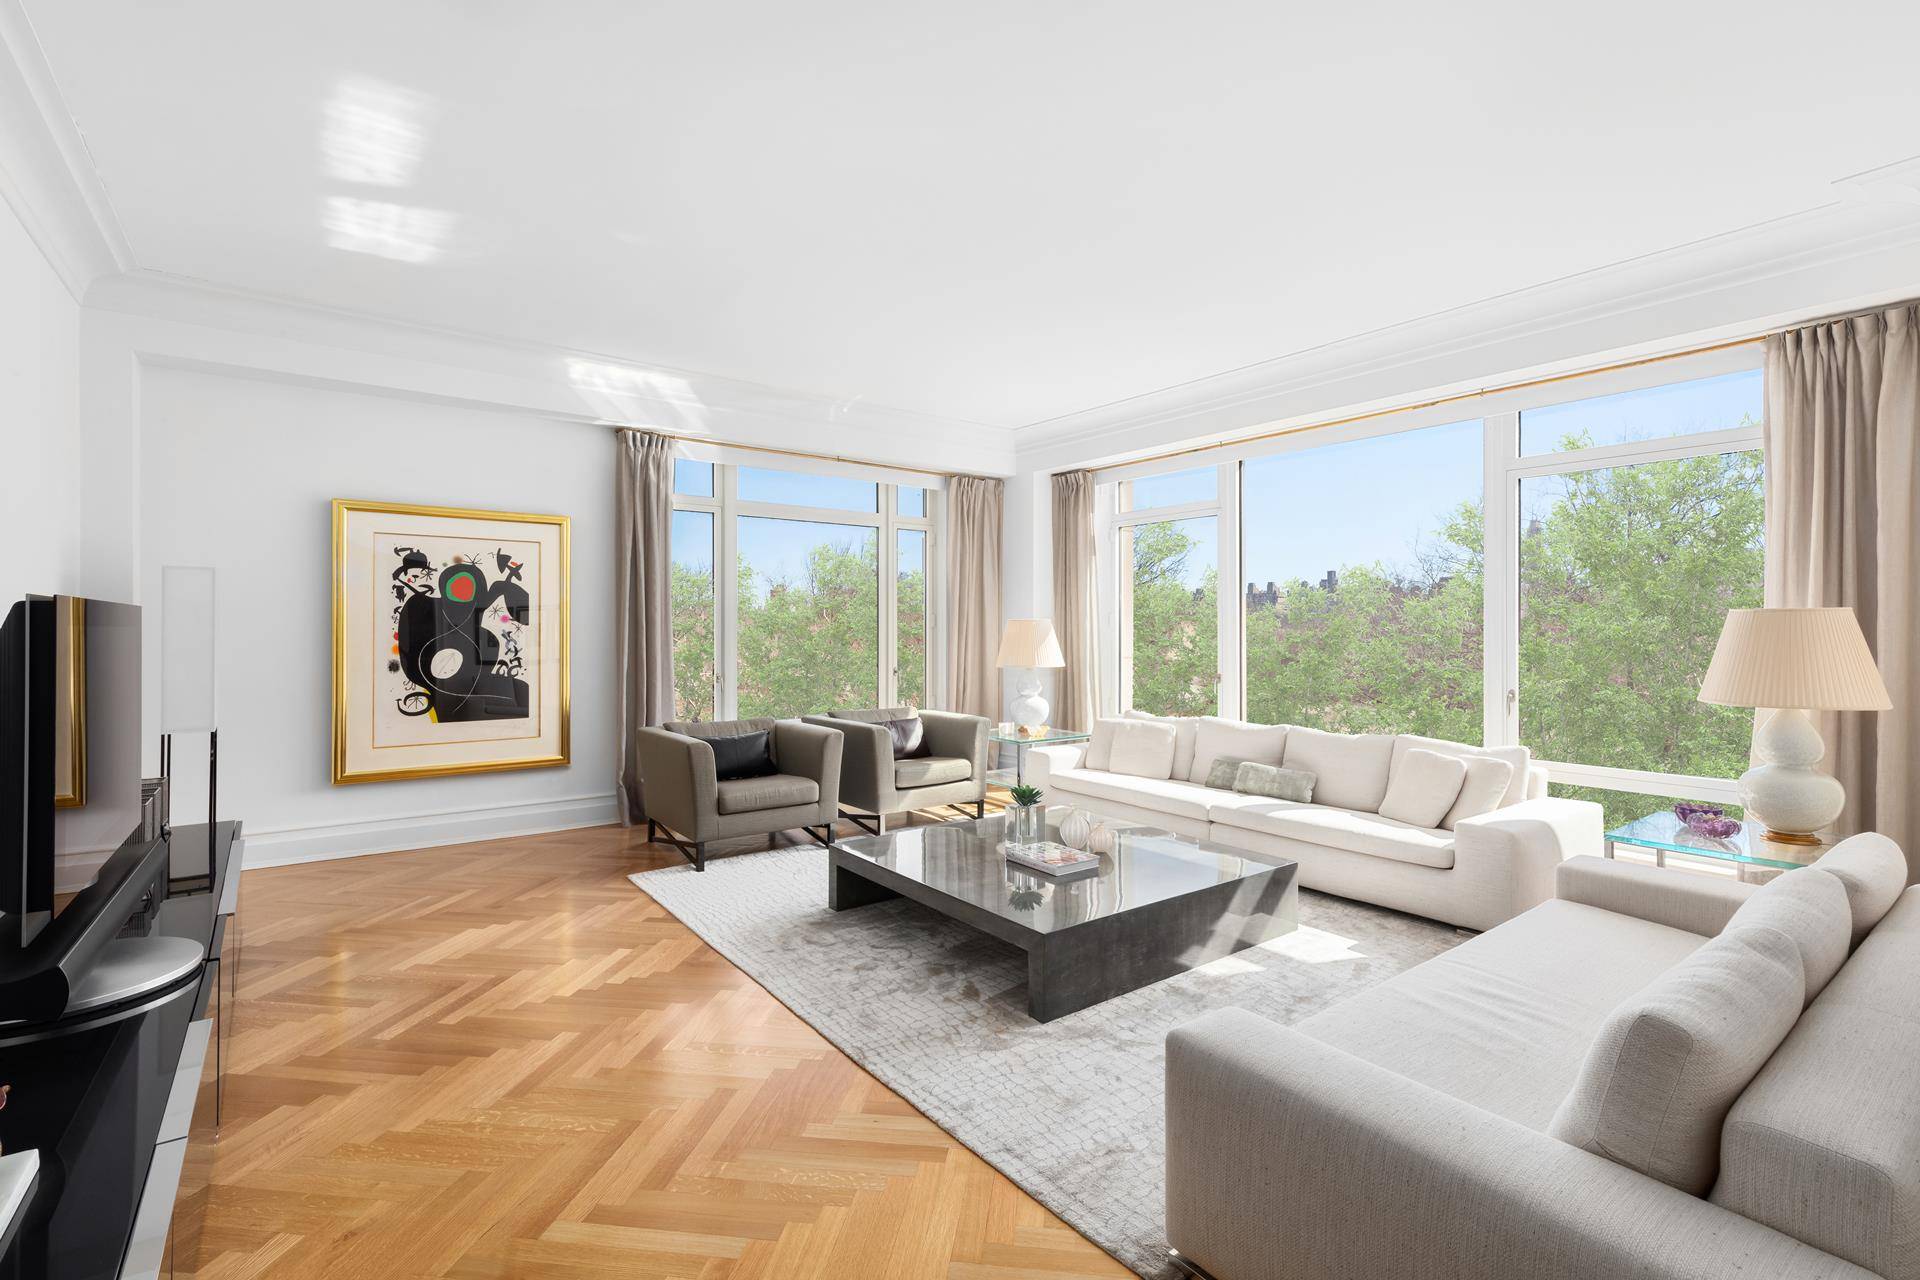 Over 54 feet of frontage of direct Central Park views from one of the largest residences available at the iconic 15 CPW, one of the City's most desirable residential condominiums ...